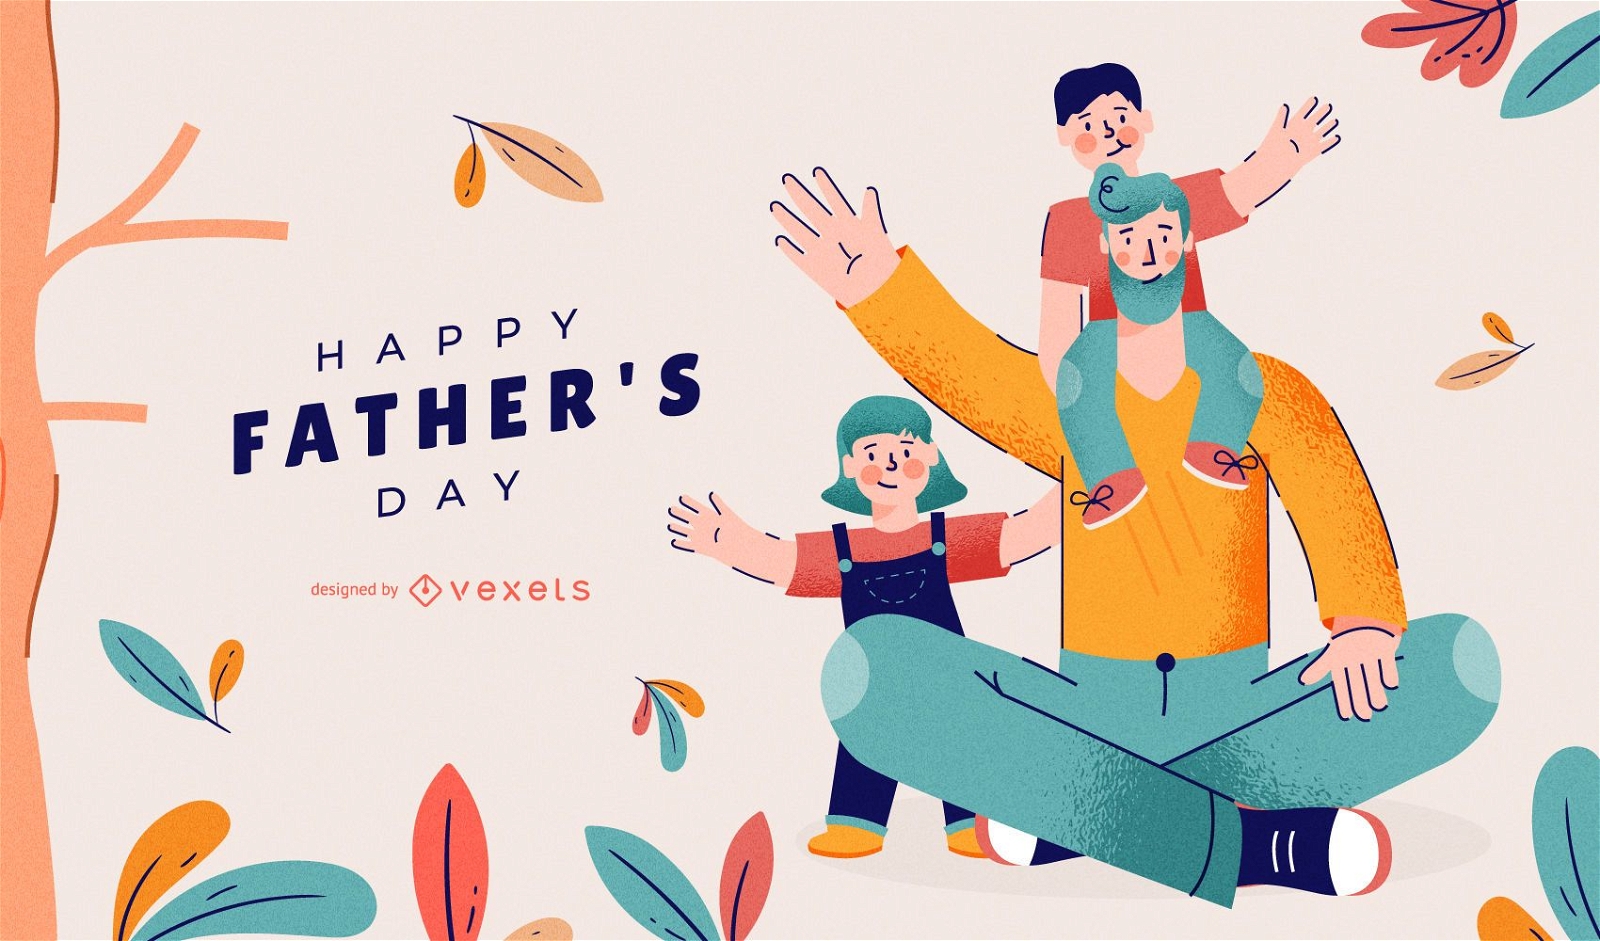 Happy father's day illustration design